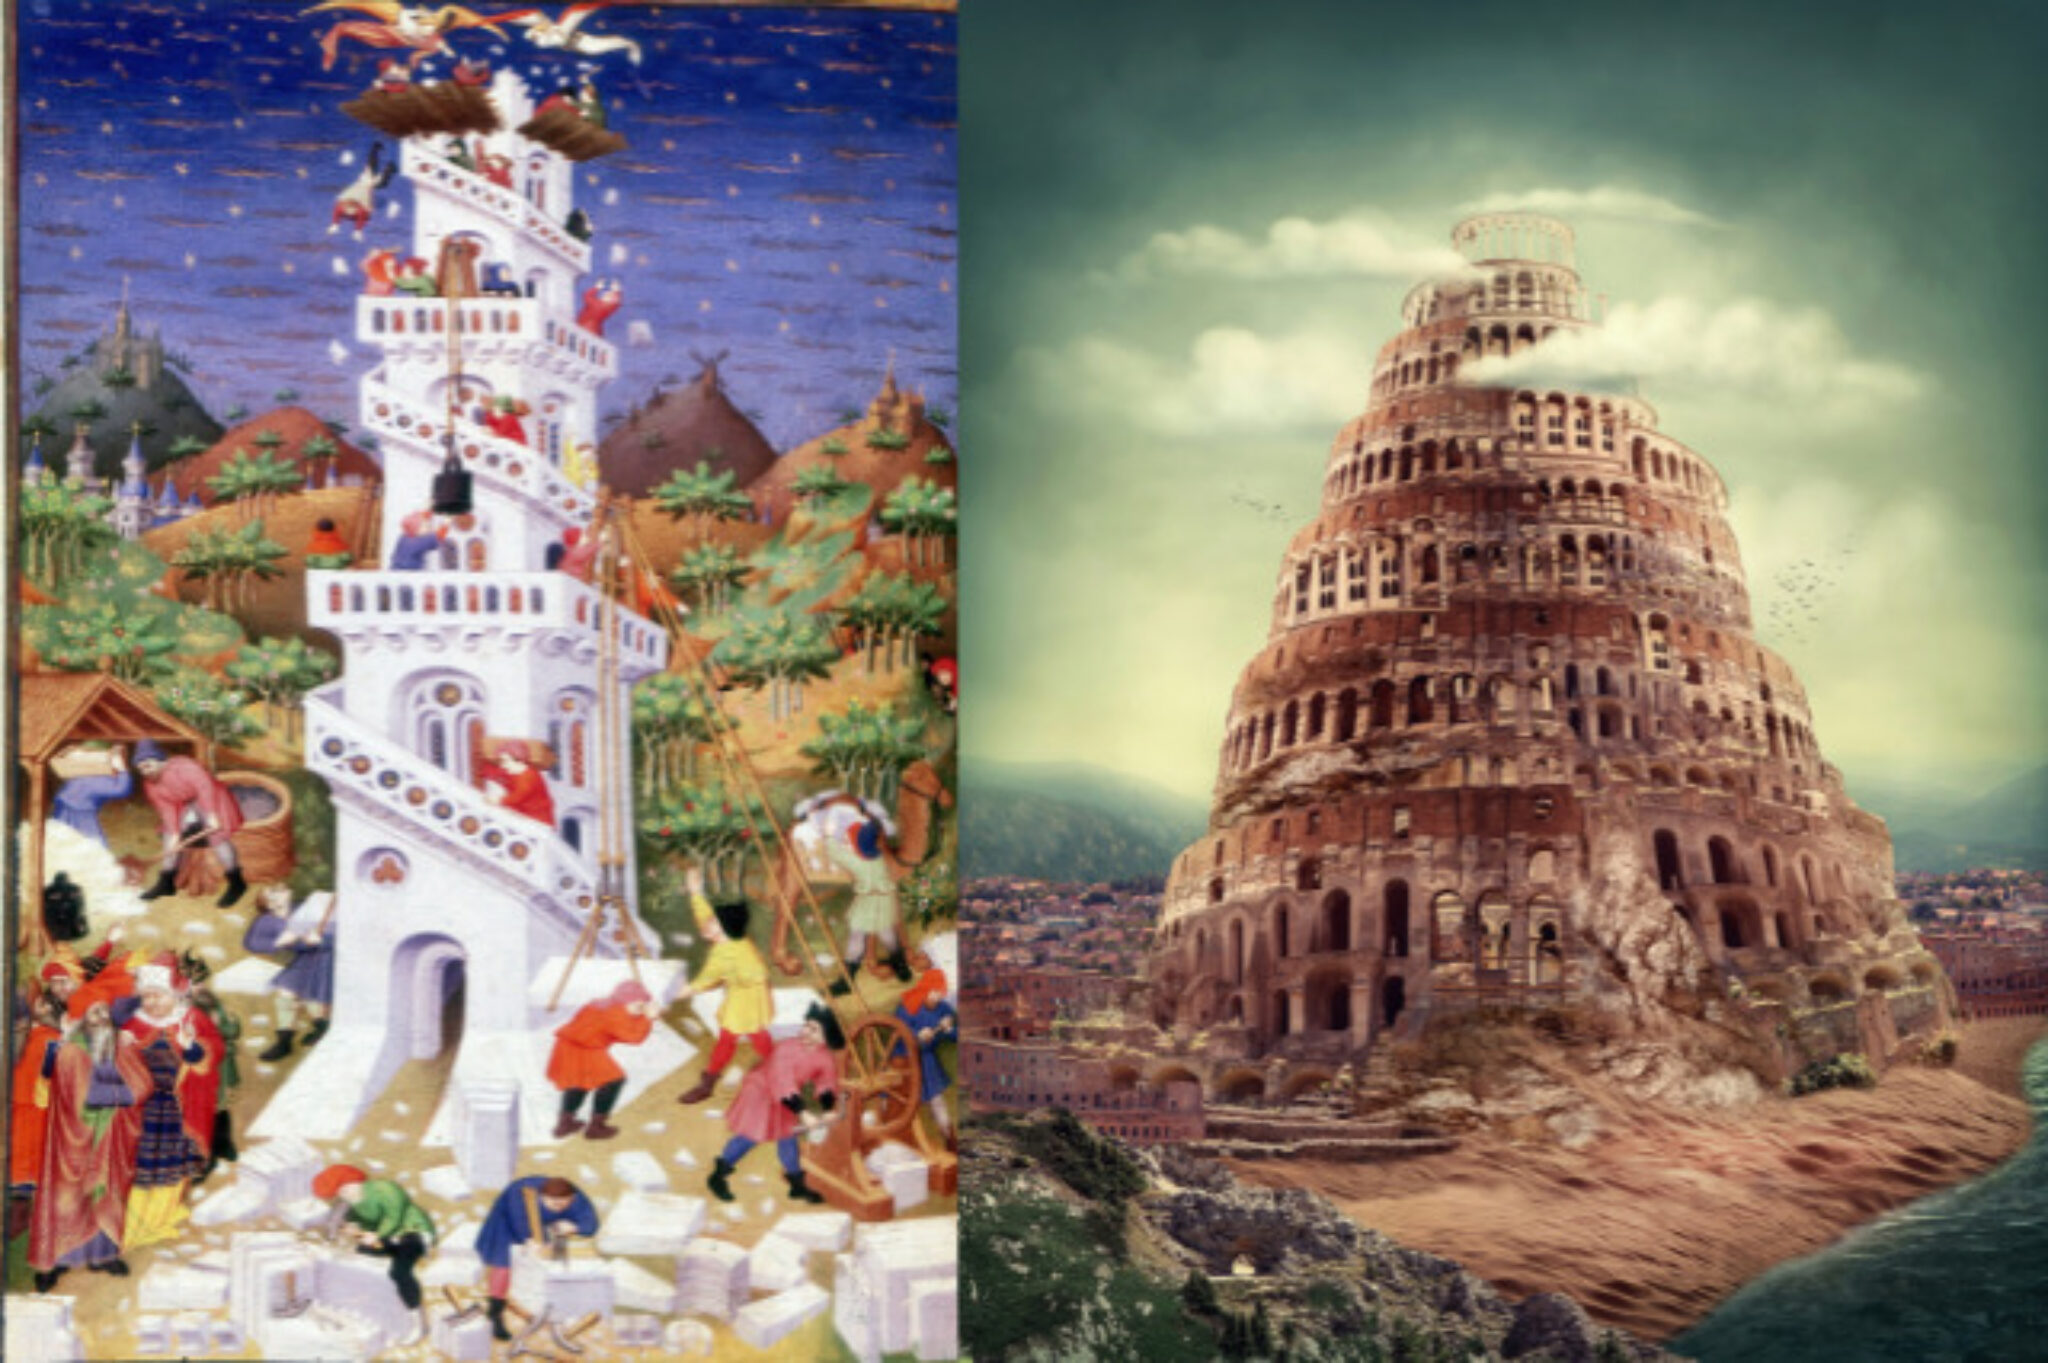 who built the tower of babel